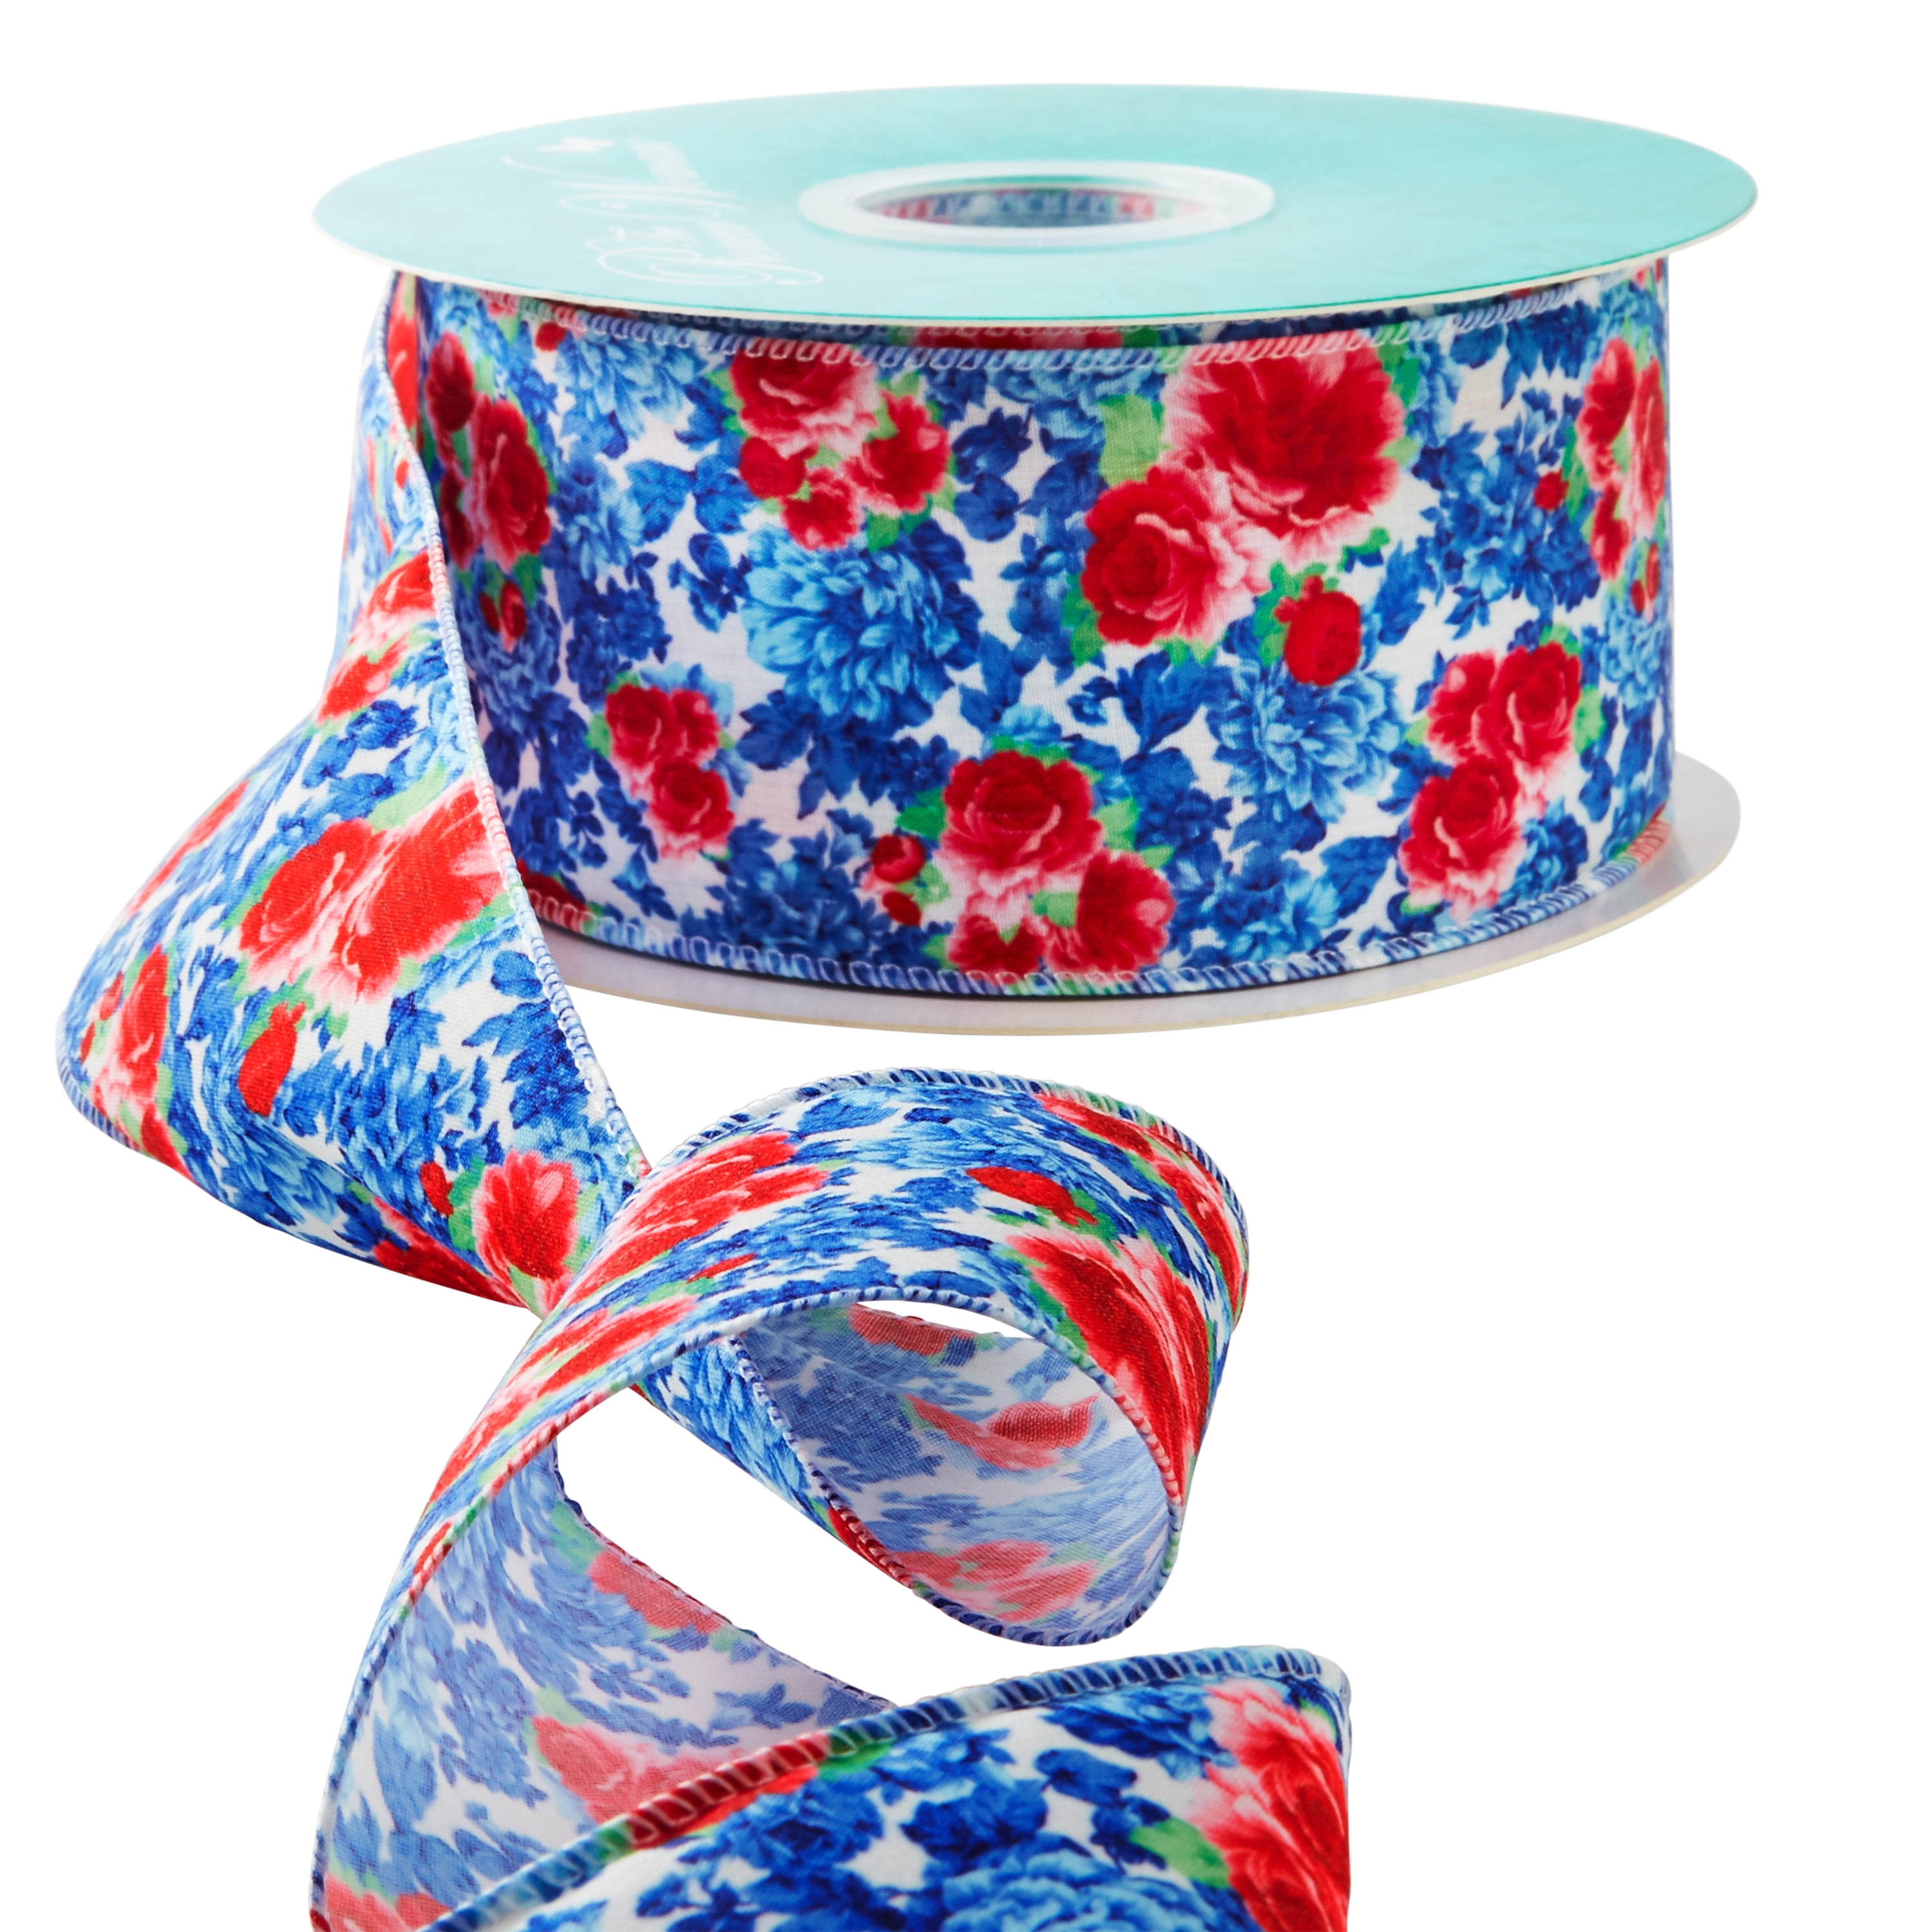 The Pioneer Woman Sewing Ribbons and Notions - Where to Buy Ree